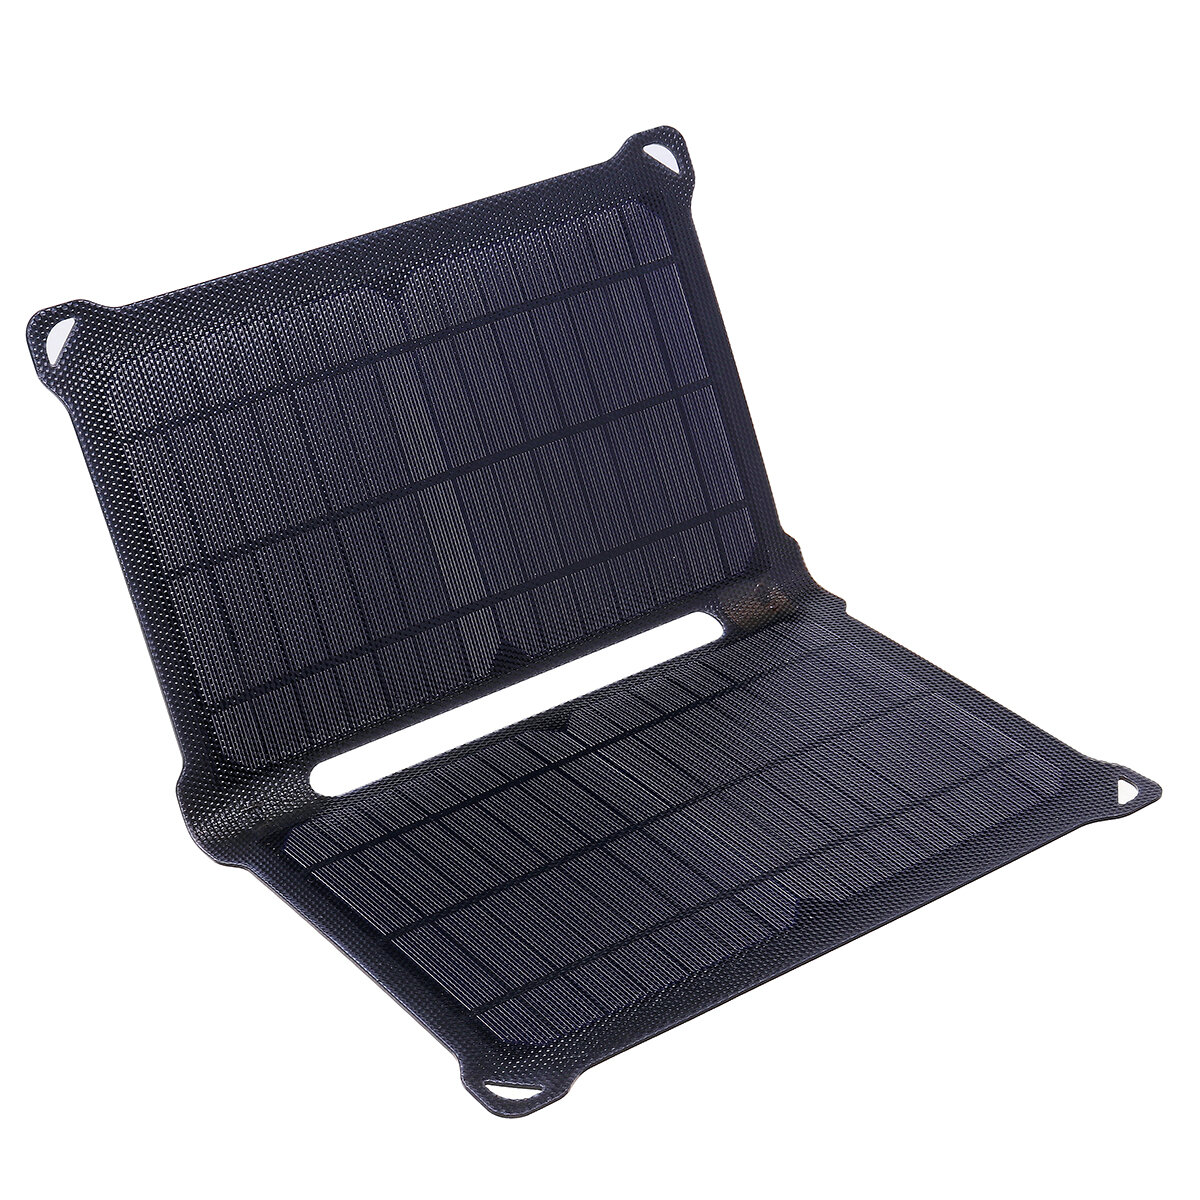 Foldable Solar Charger Waterproof ETFE Monoctrystalline Solar Panel Dual USB Ports Outdoor Camping C